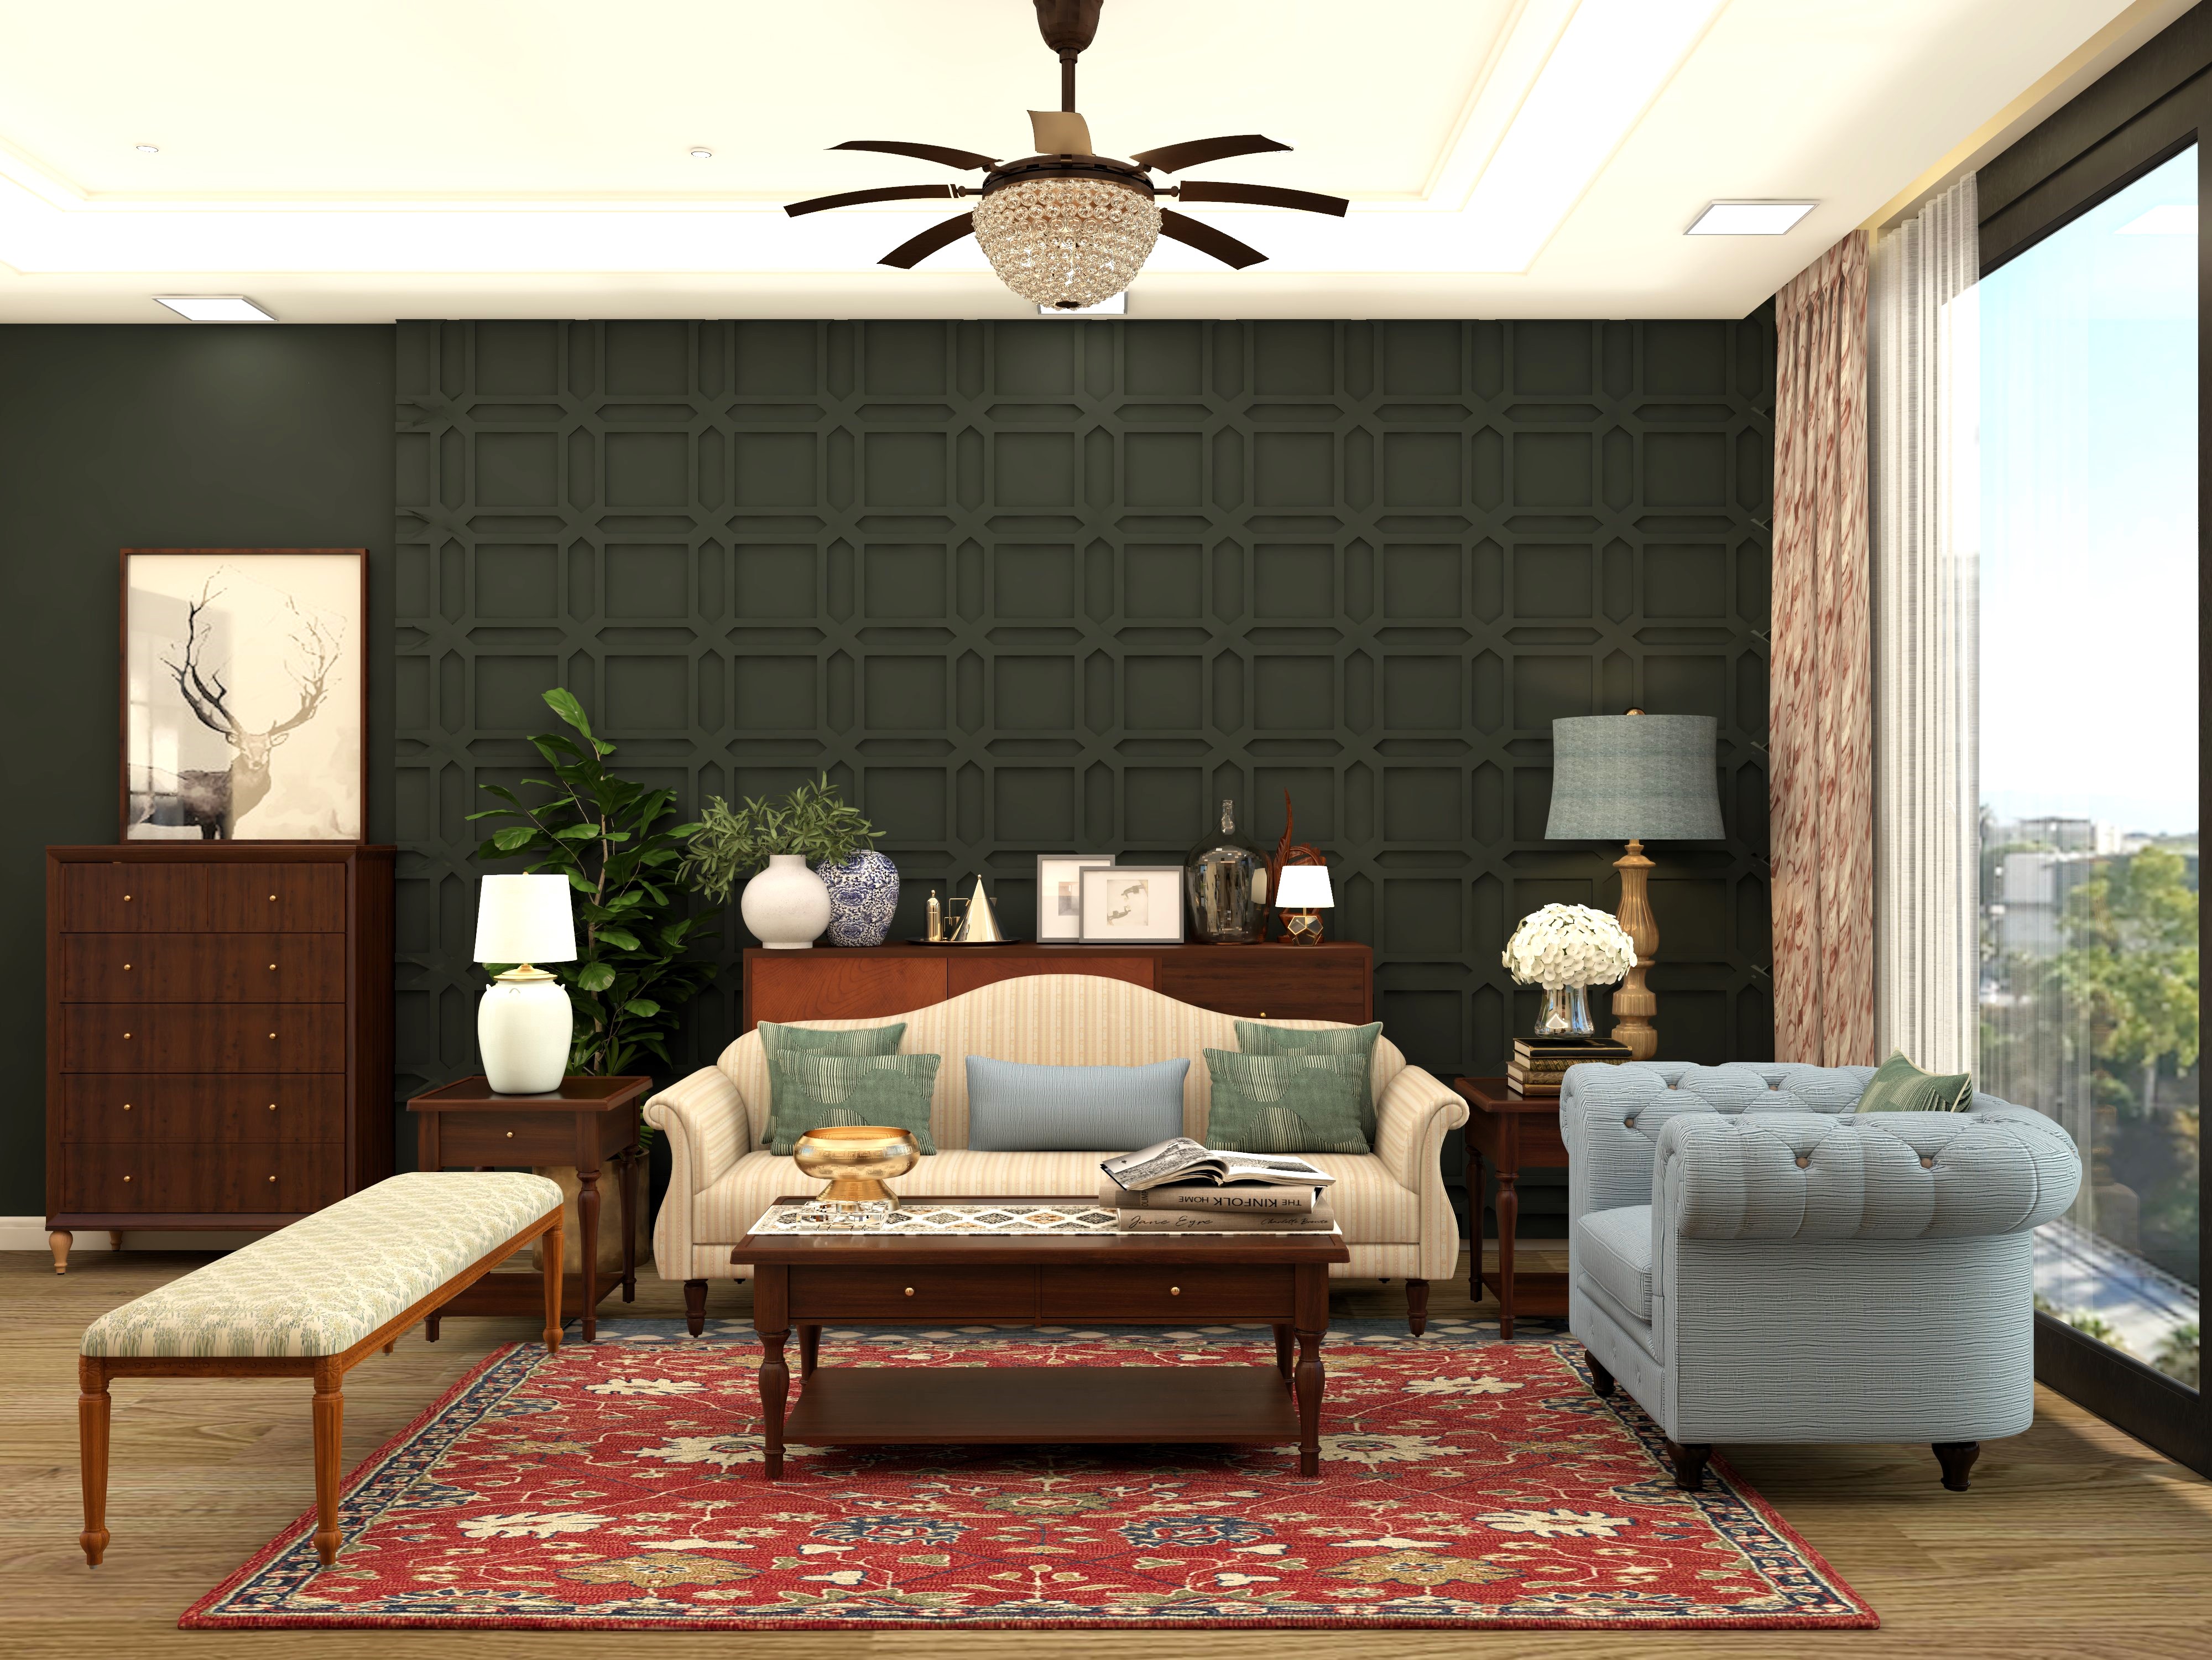 Modern Indian theme living room with square back panel and chandelier - Beautiful Homes